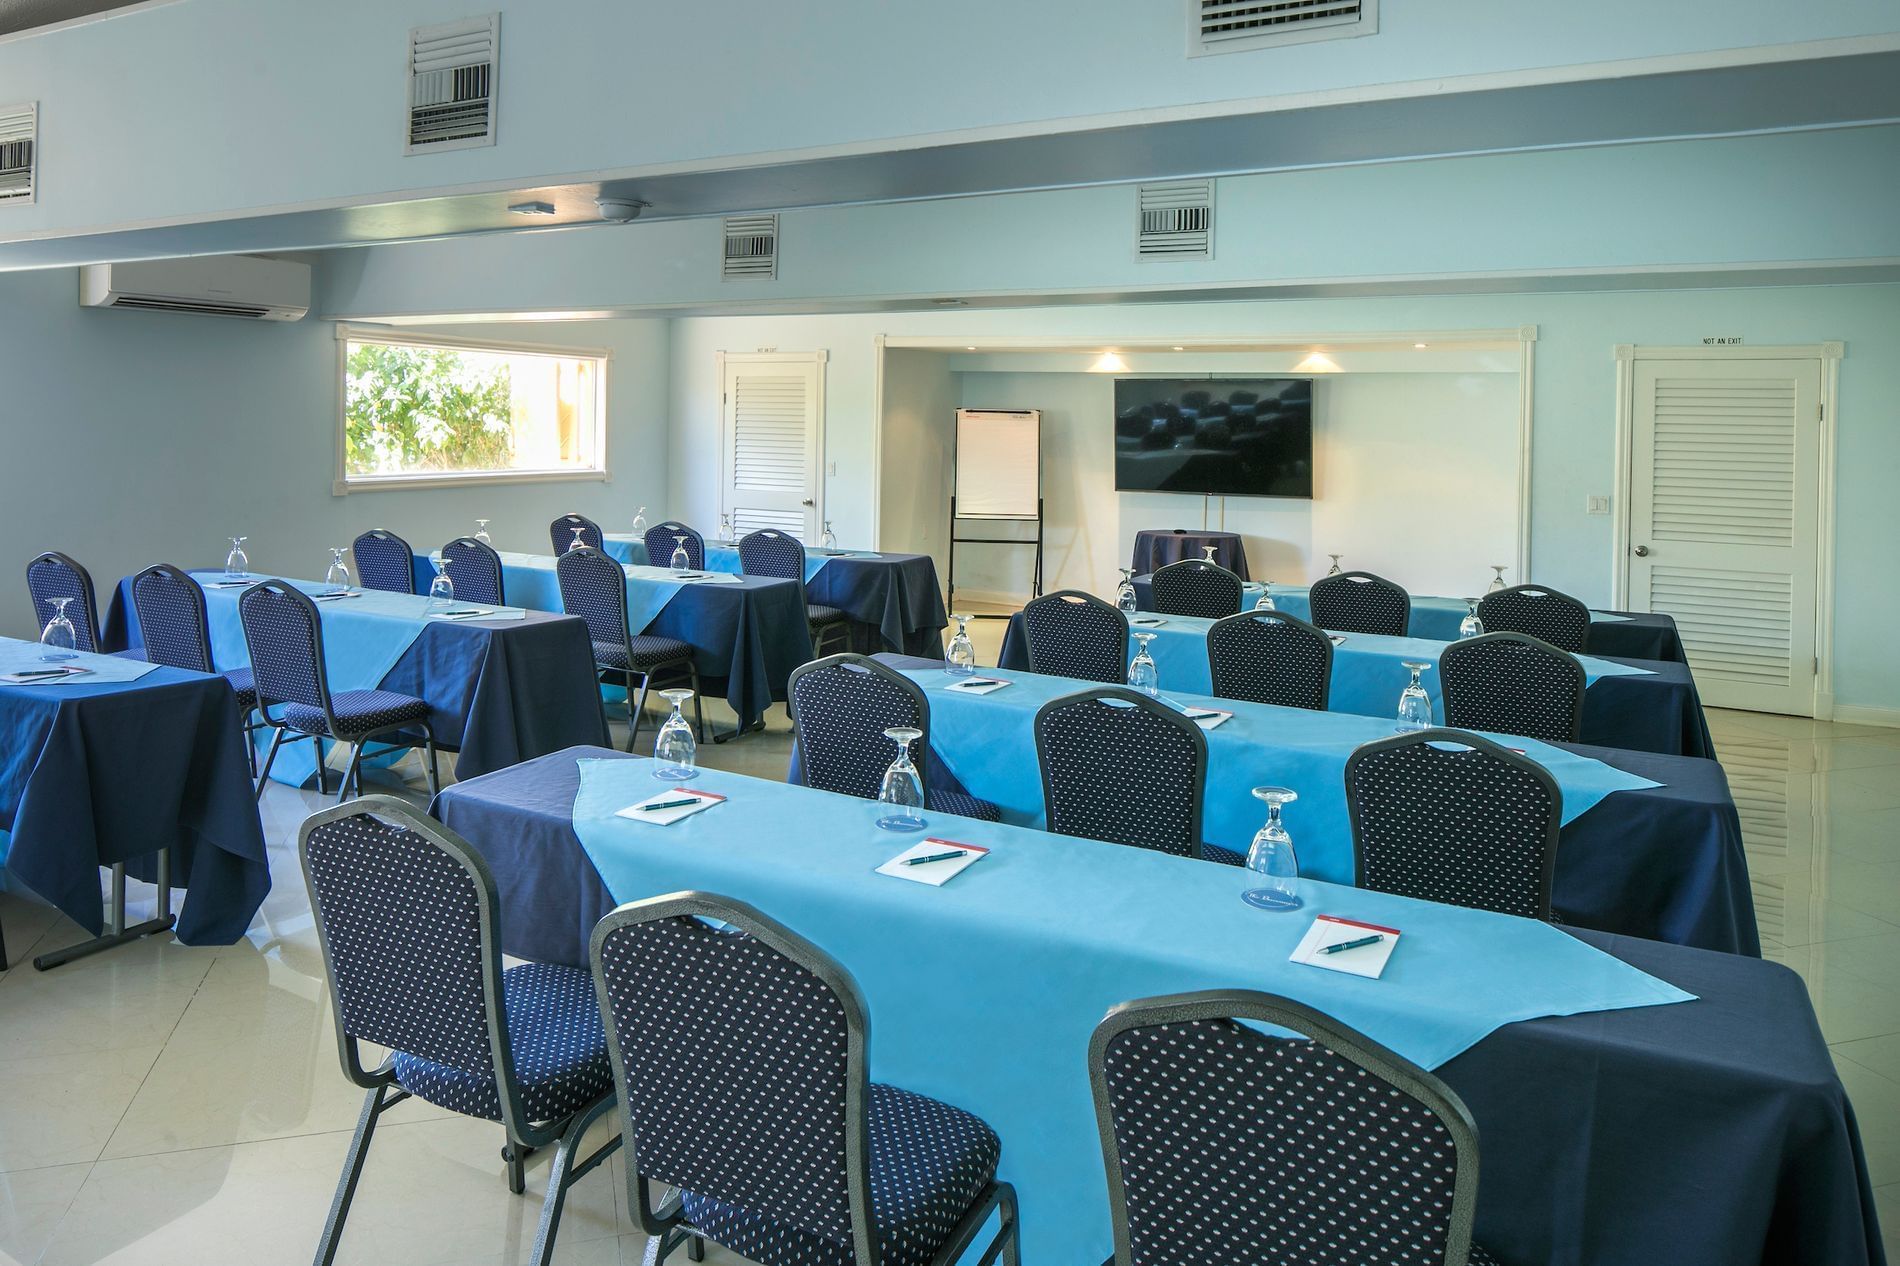 Classroom table set-up in Beach Meeting Room at The Buccaneer Resort St. Croix